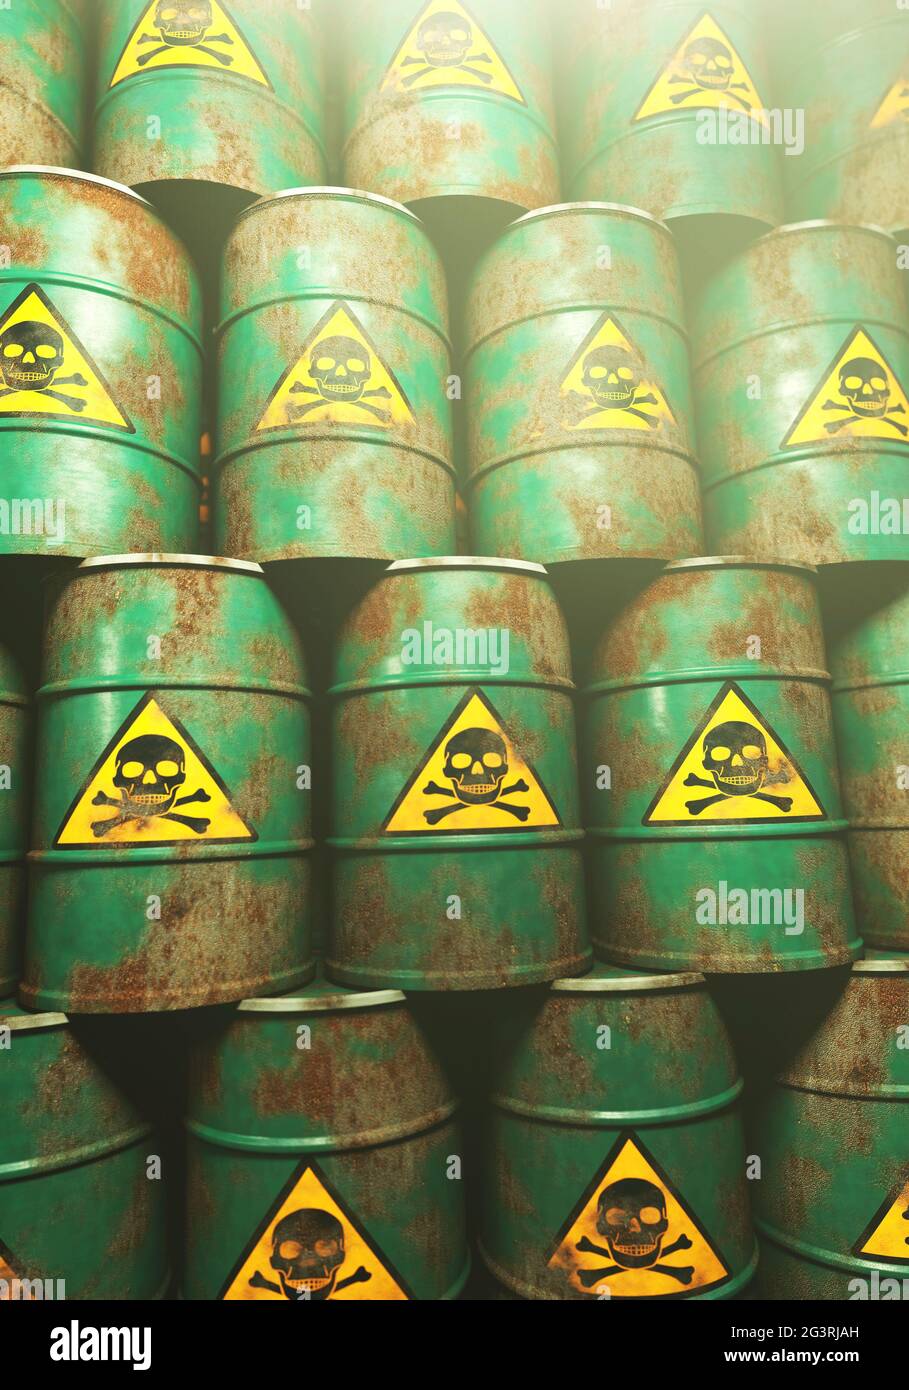 Warehouse with toxic waste barrels, portrait format Stock Photo